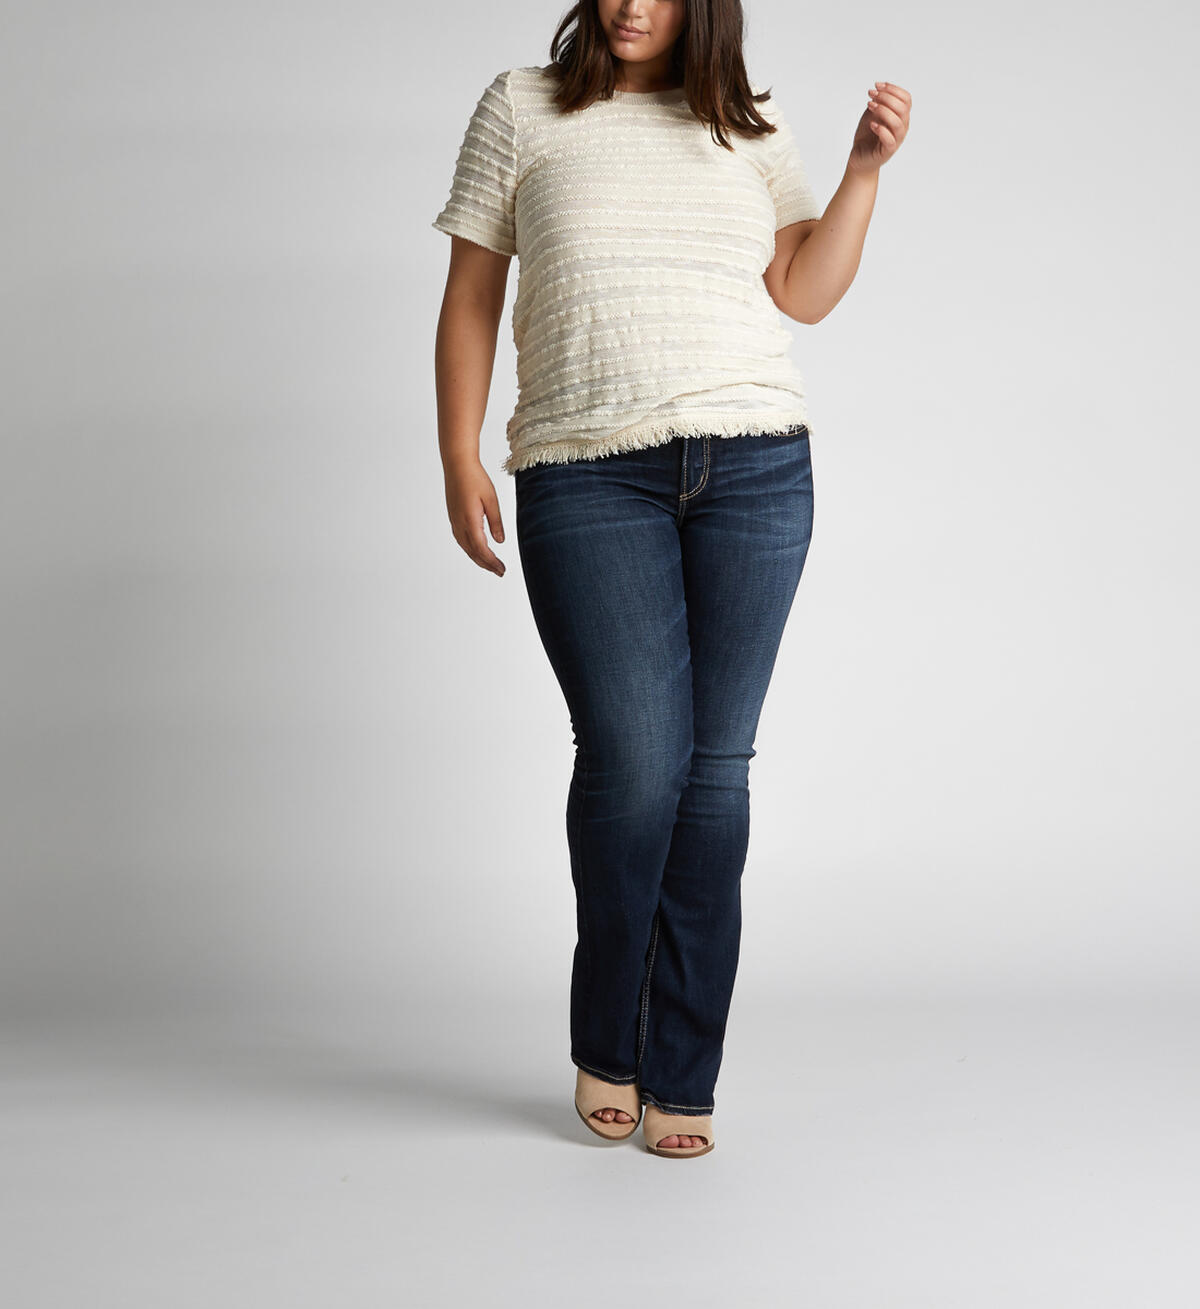 Elyse Mid-Rise Curvy Relaxed Slim Bootcut Jeans, , hi-res image number 3